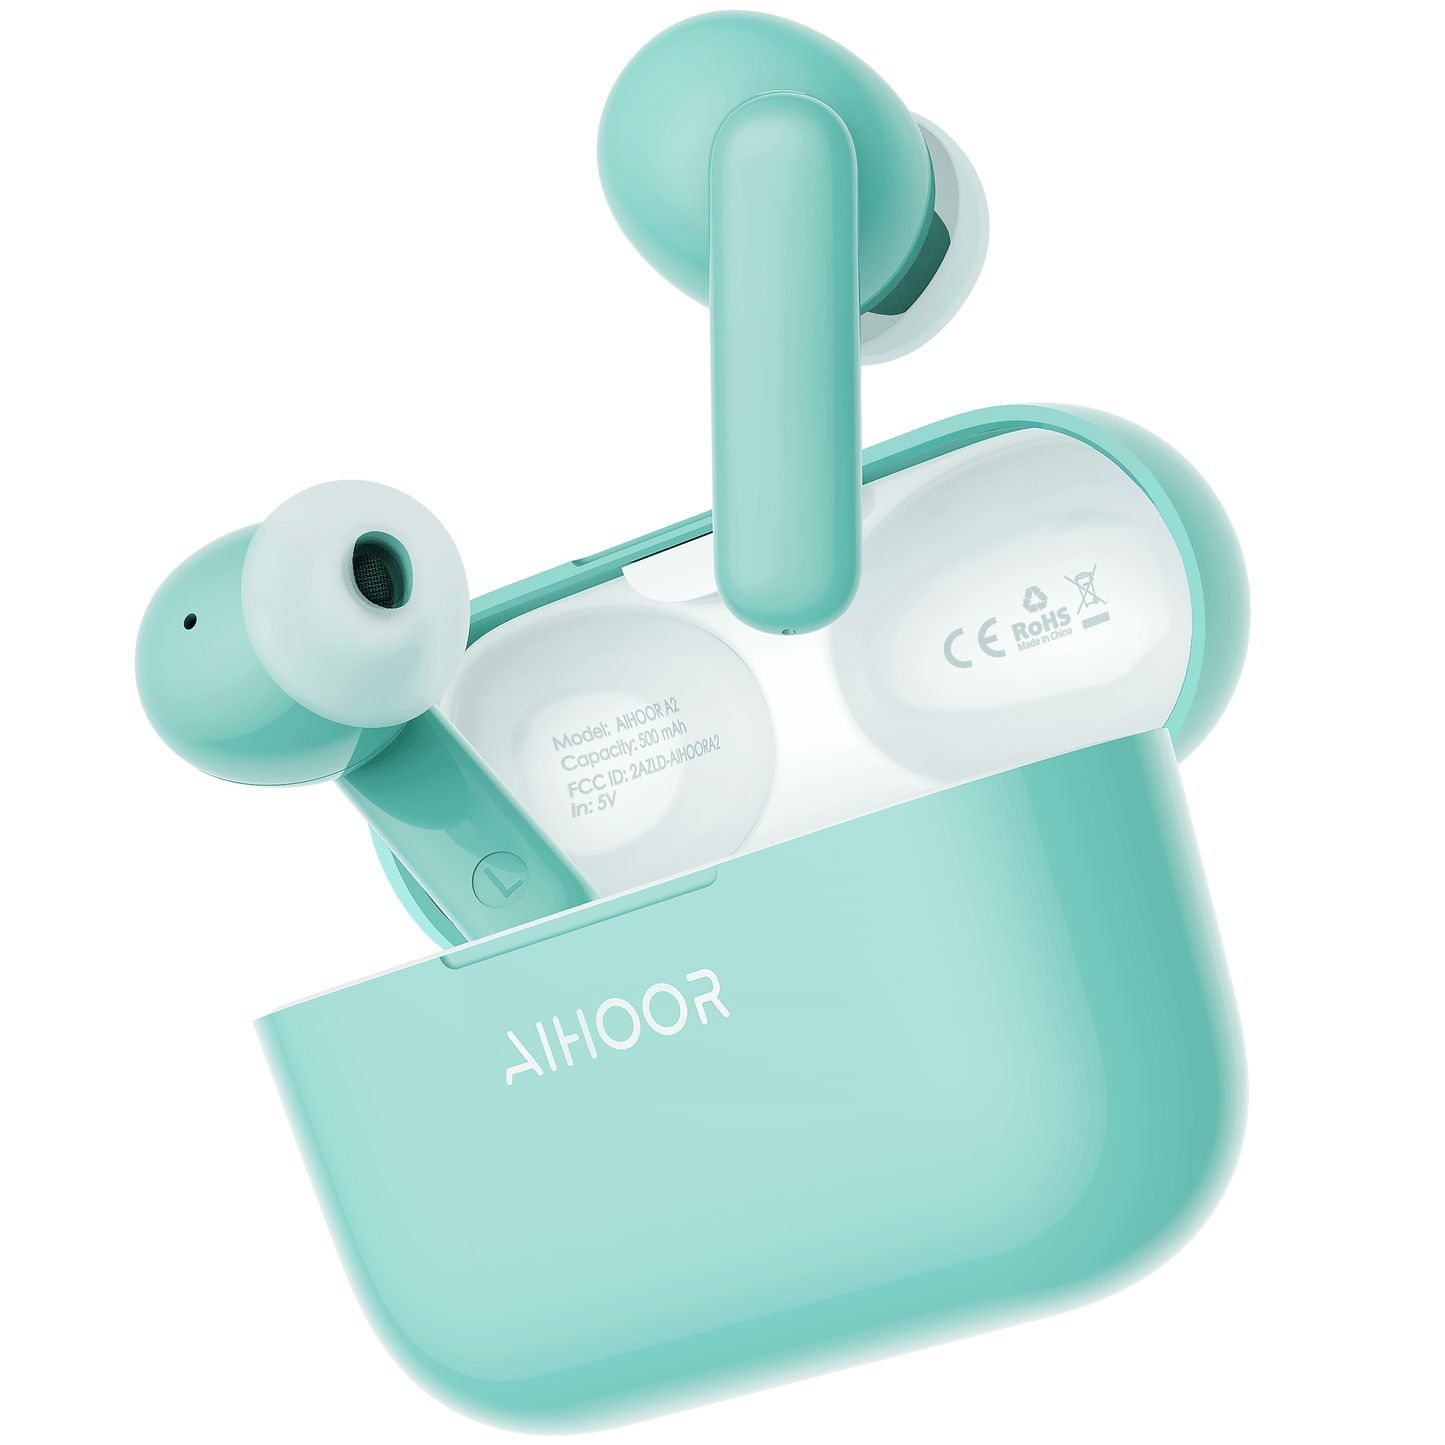 AIHOOR A2 - Wireless In-Ear Earbuds with Extra Bass Performance